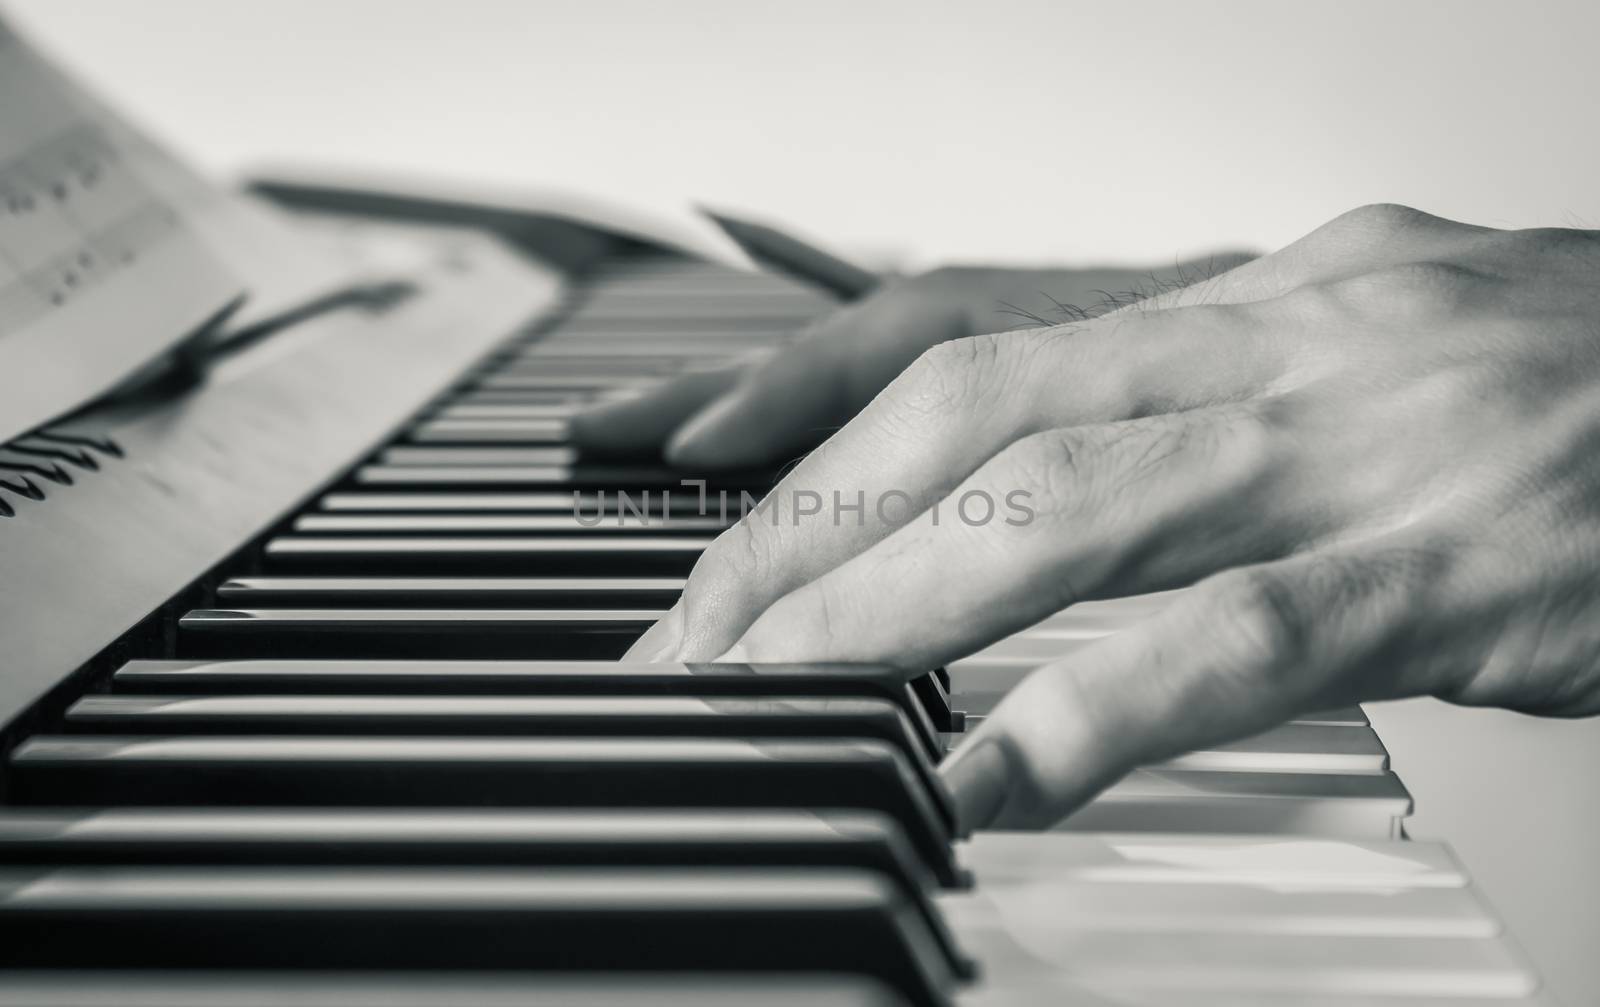 Hand of Piano Player on White Keys and Black Keys of Electric Piano with Sheet Music or Piano Staff